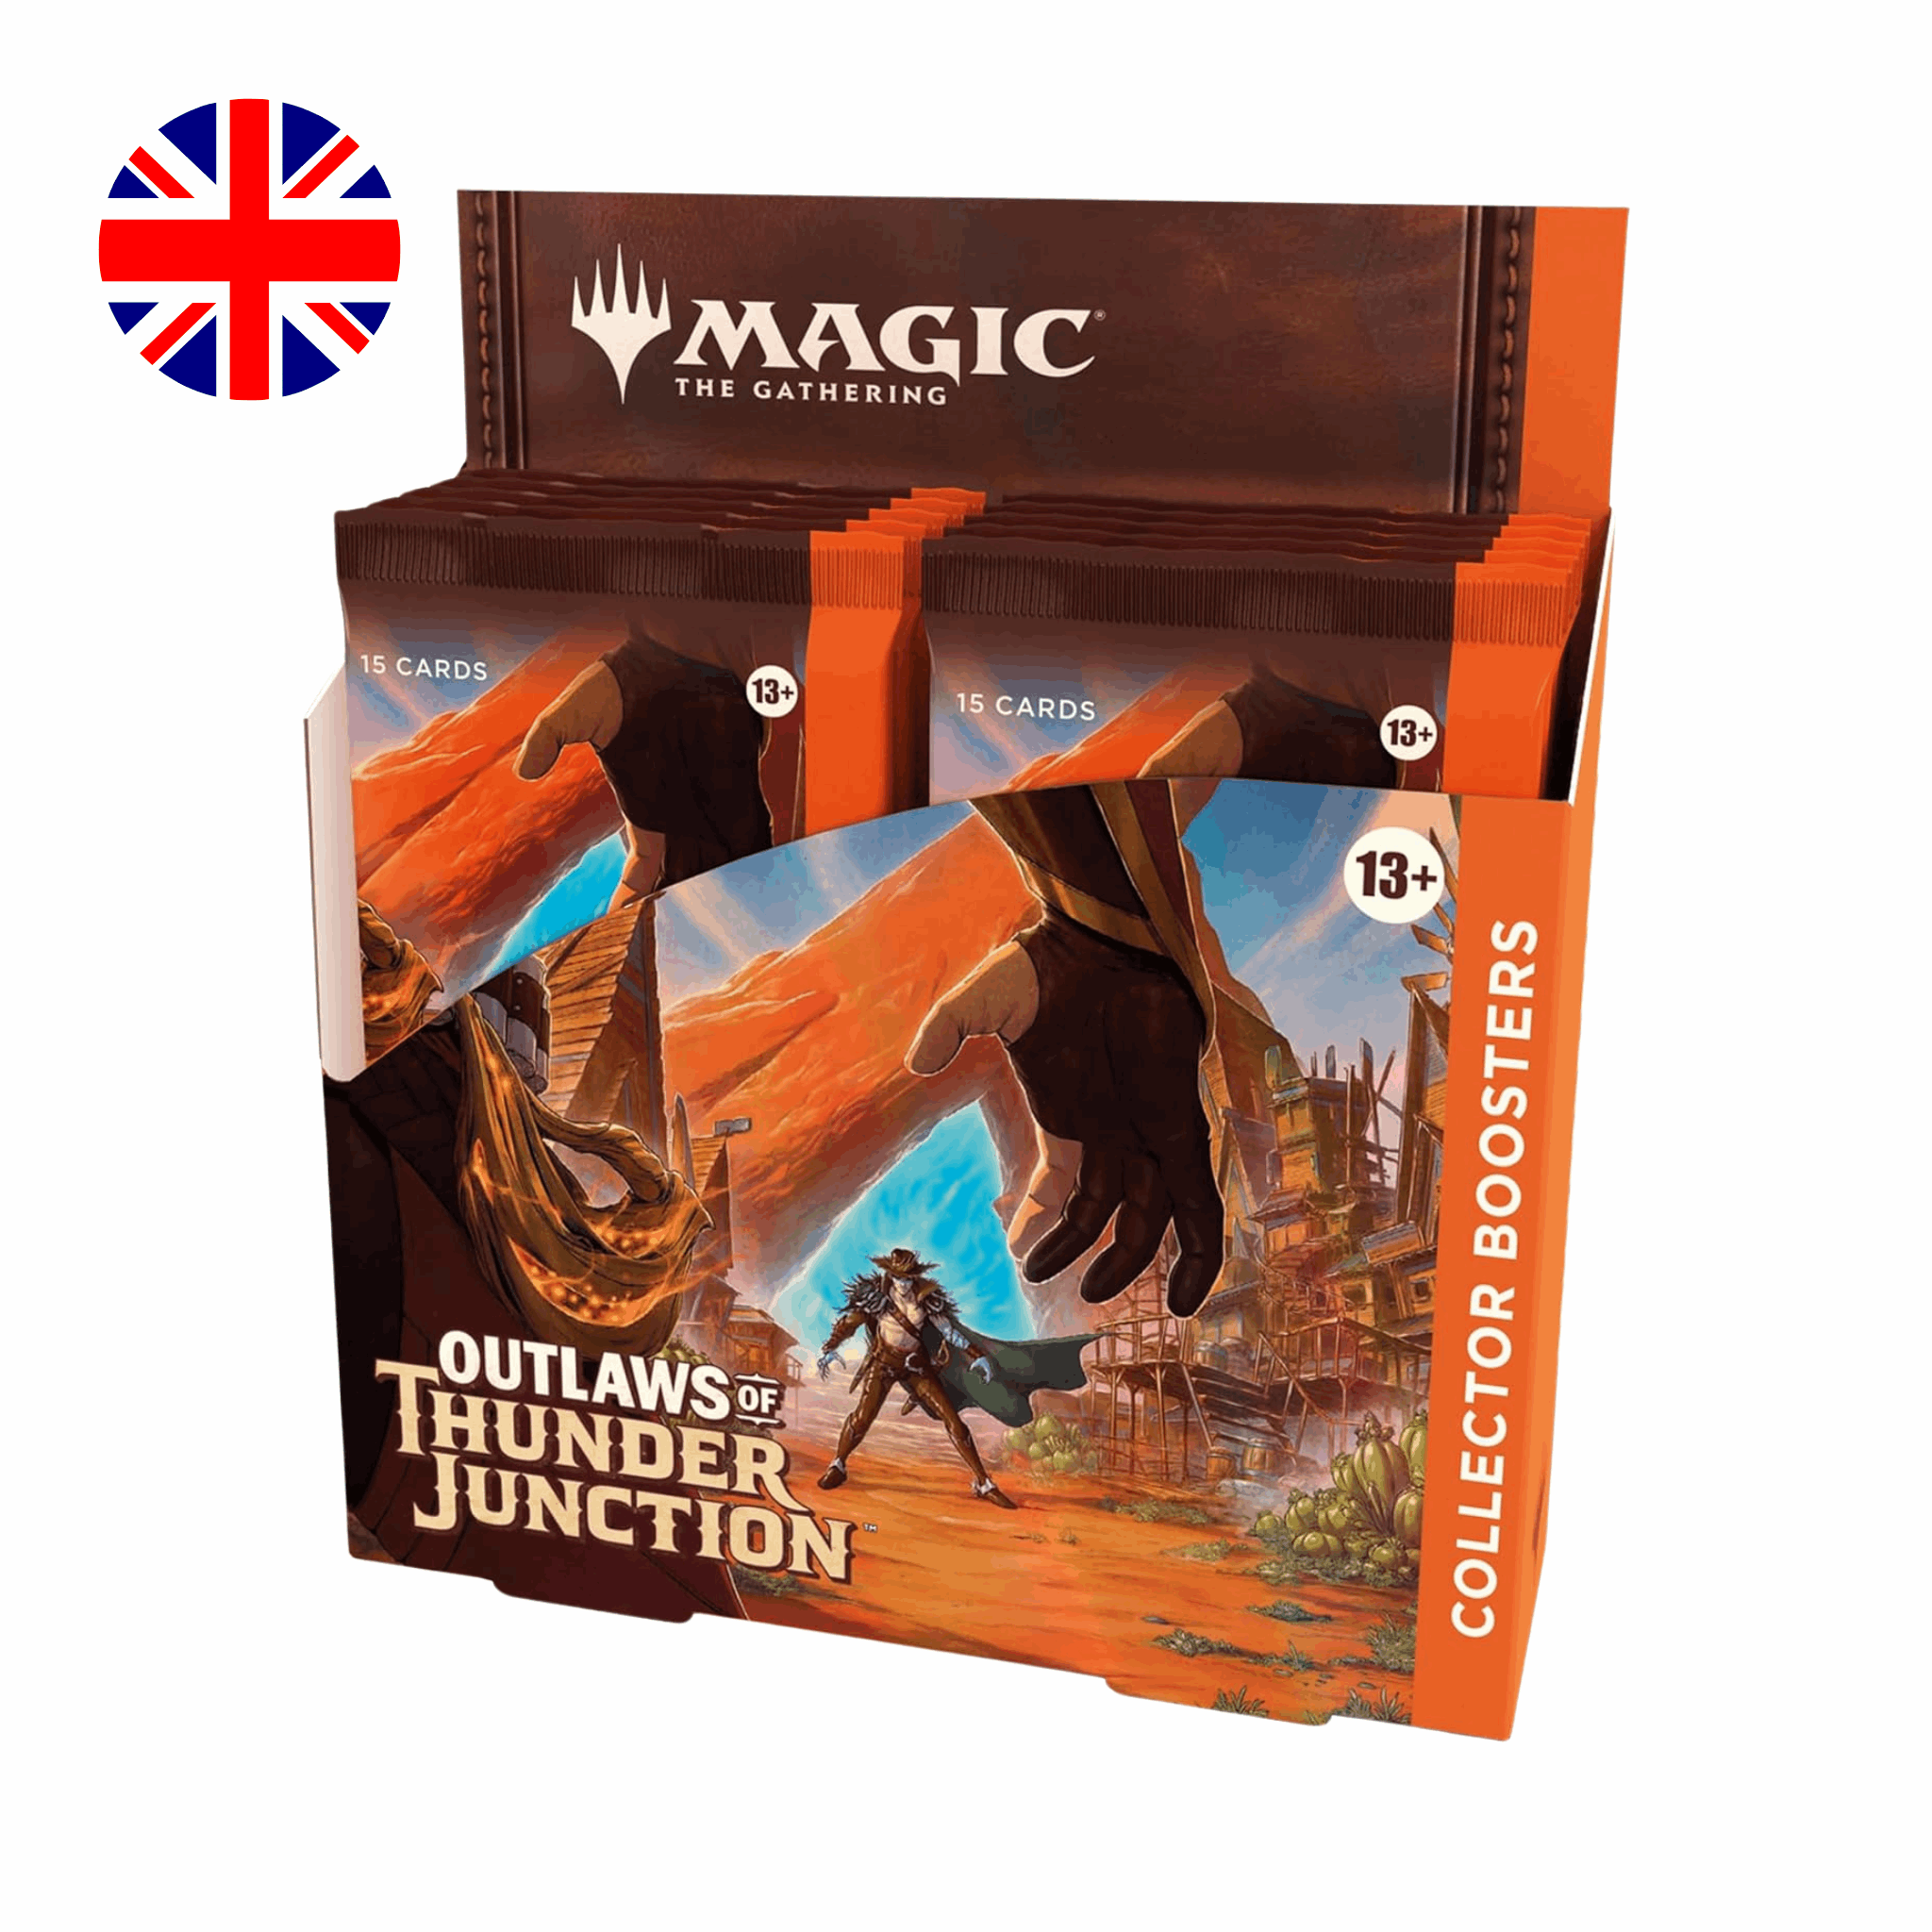 Magic: The Gathering - Outlaws of Thunder Junction Collectors Booster Box - EN